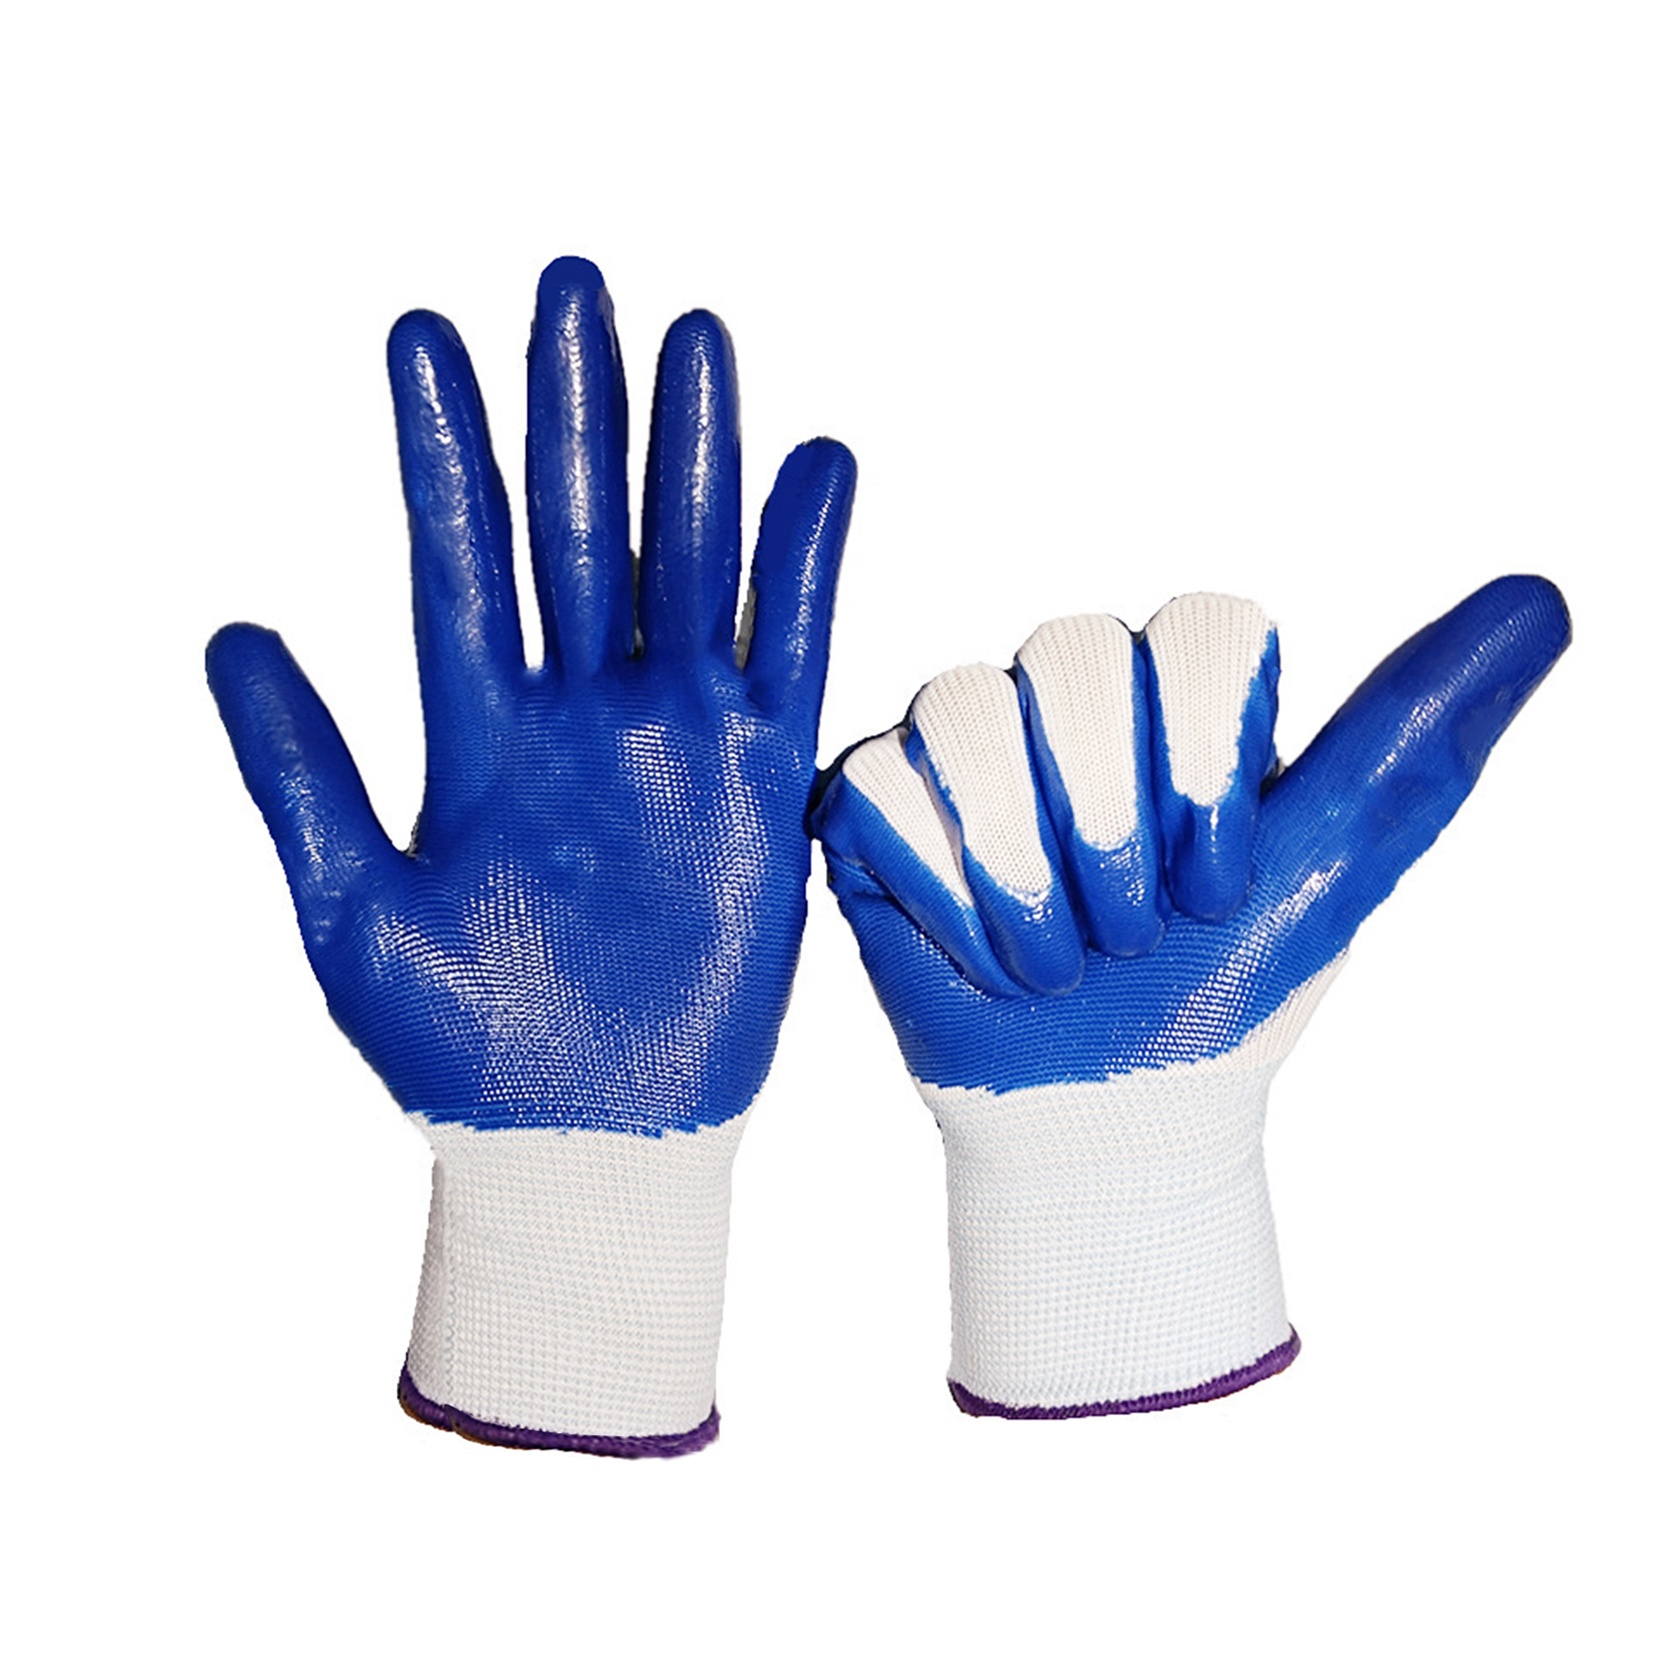 Customizable Blue White Polyester Palm Nitrile Coated Work Gloves (3)